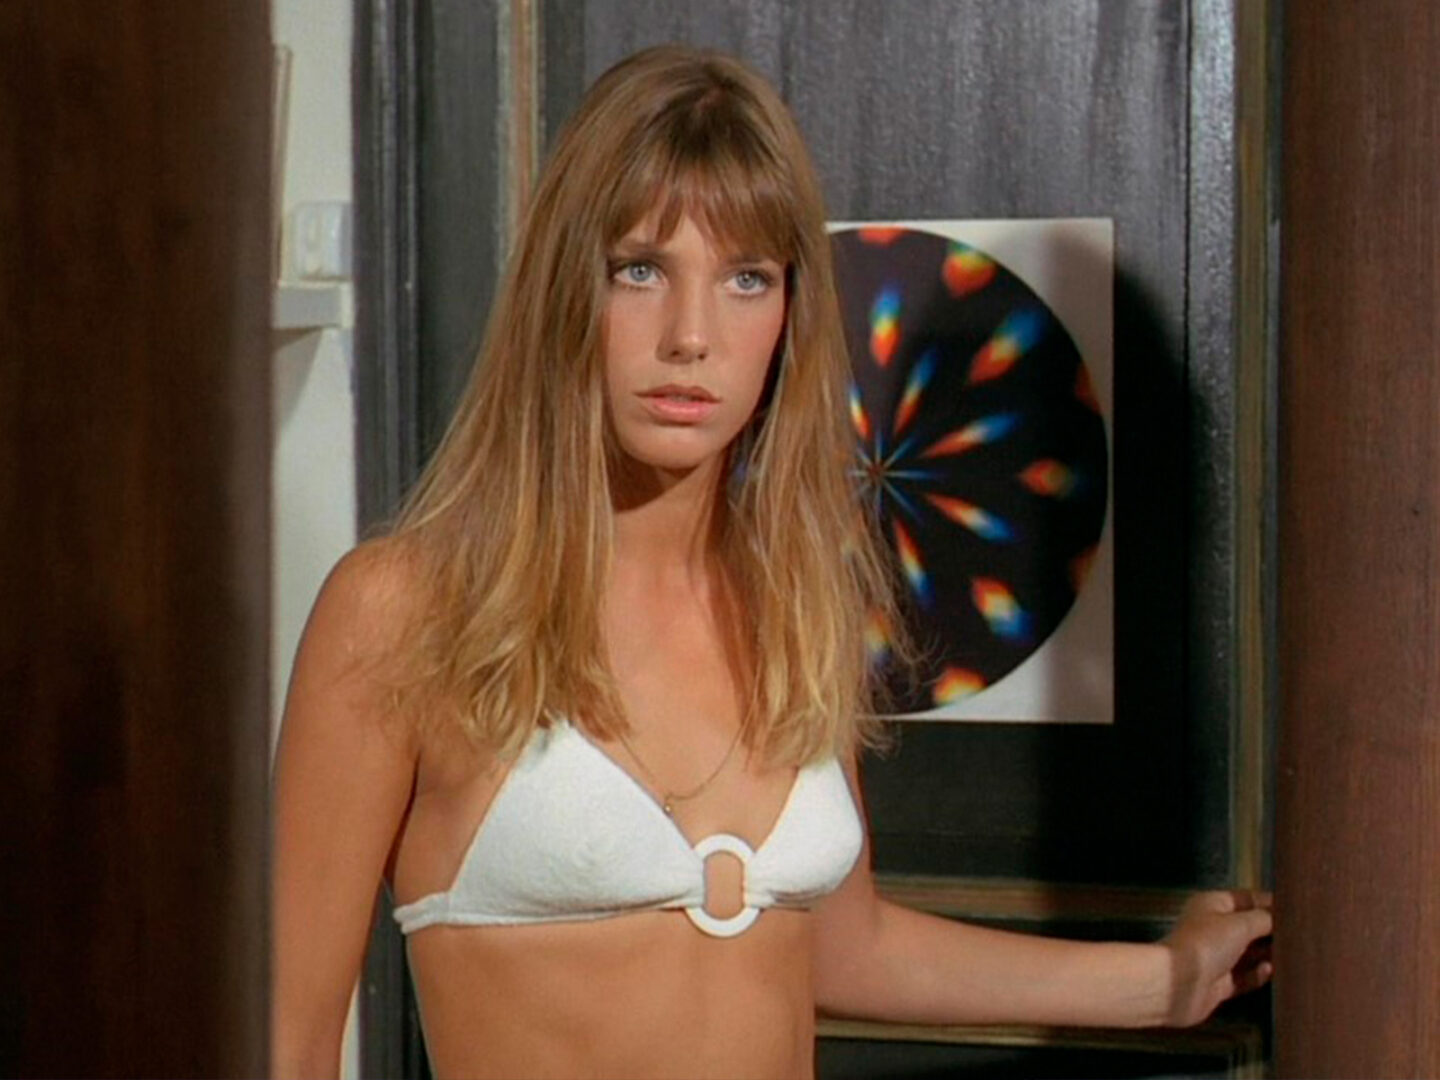 Jane Birkin passes away at 76: remembering some of her iconic looks